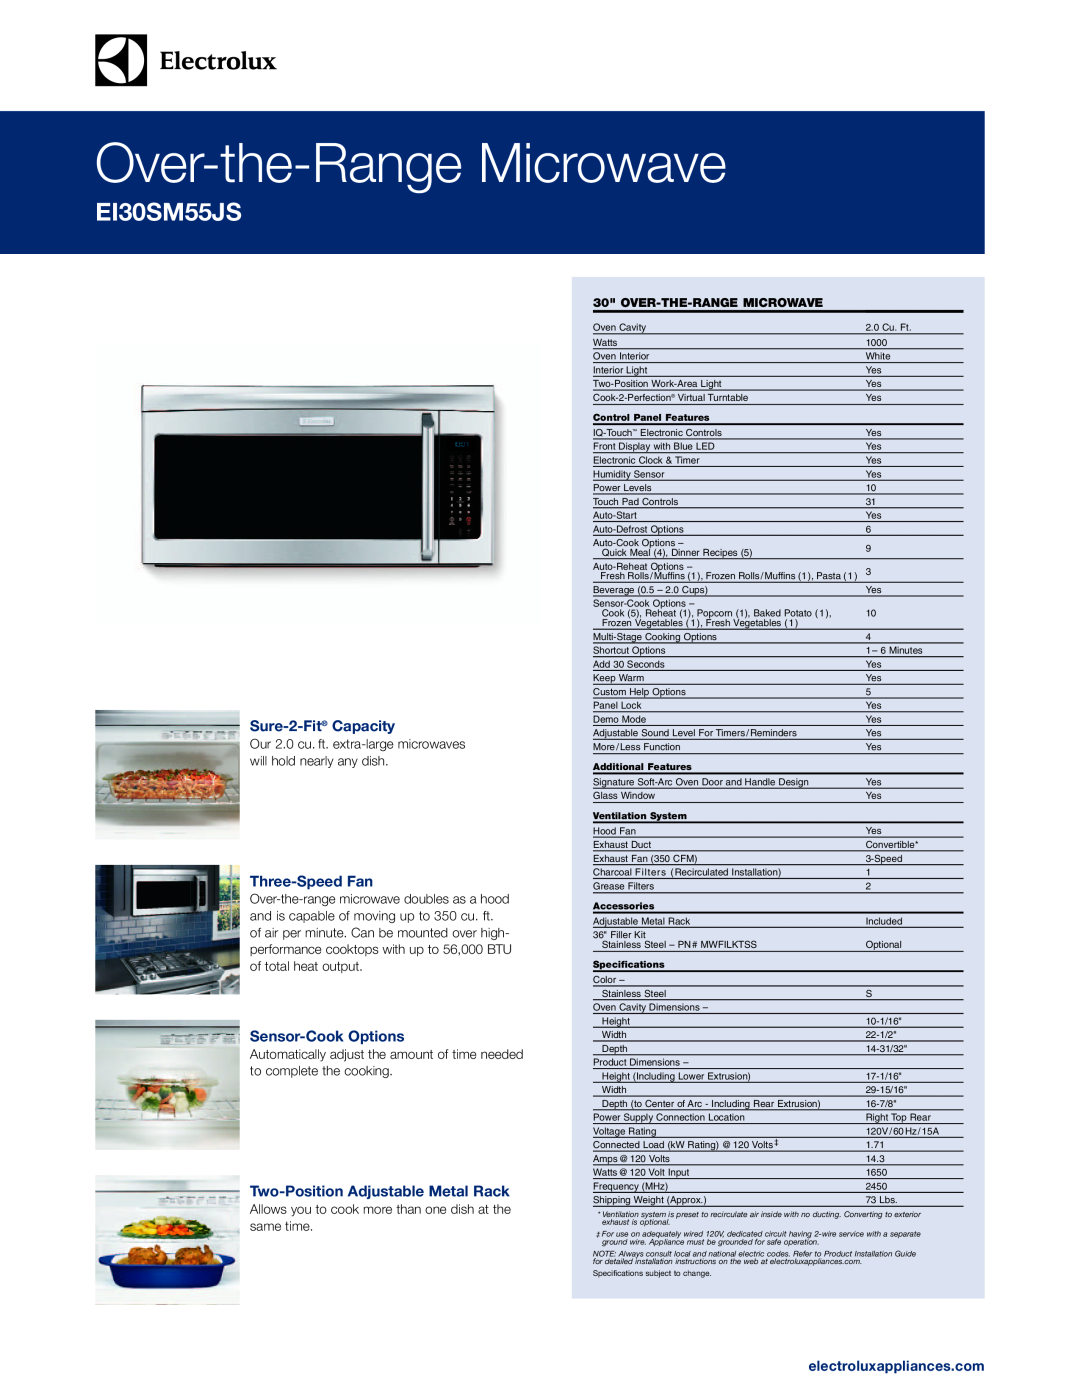 Electrolux EI30SM55JS specifications Sure-2-Fit Capacity, Three-Speed Fan, Sensor-Cook Options, electroluxappliances.com 